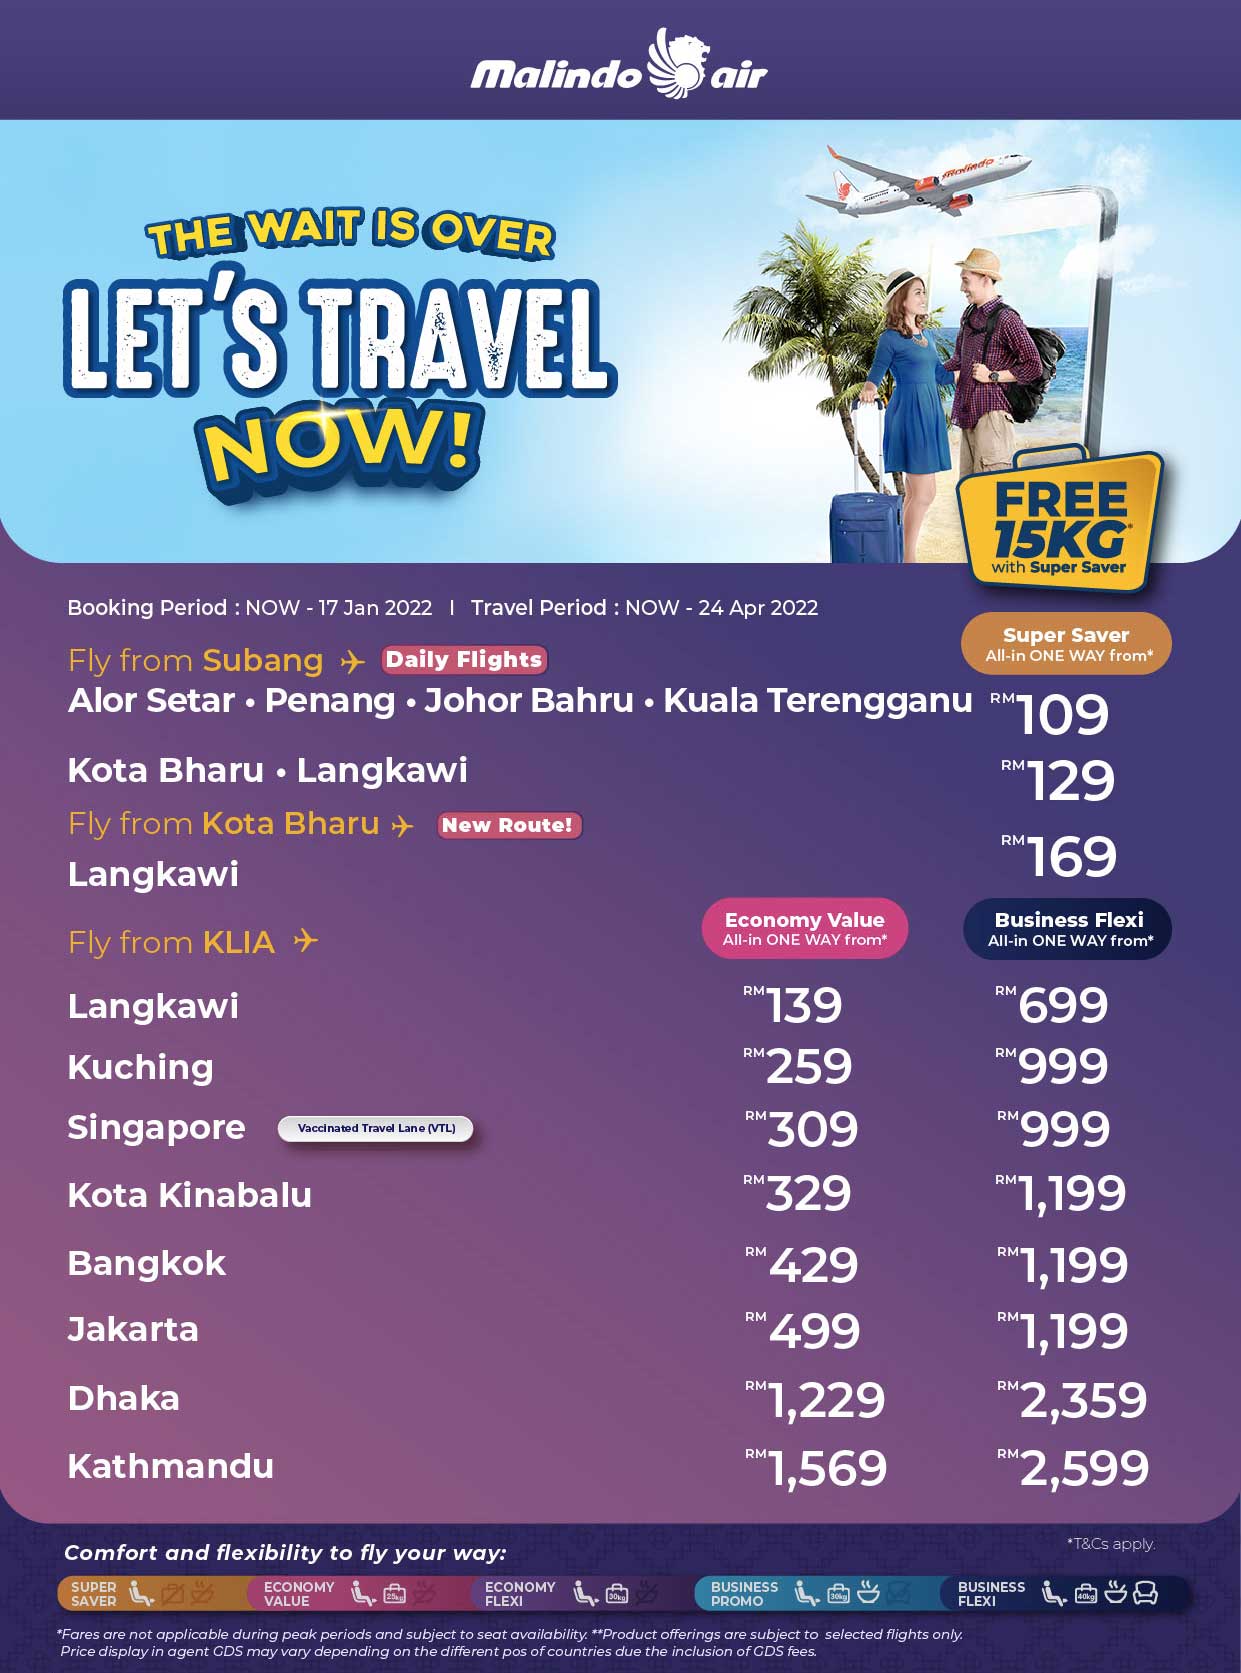 Malindo Air Let's Travel Now! OD 20220105 Lets Travel Now